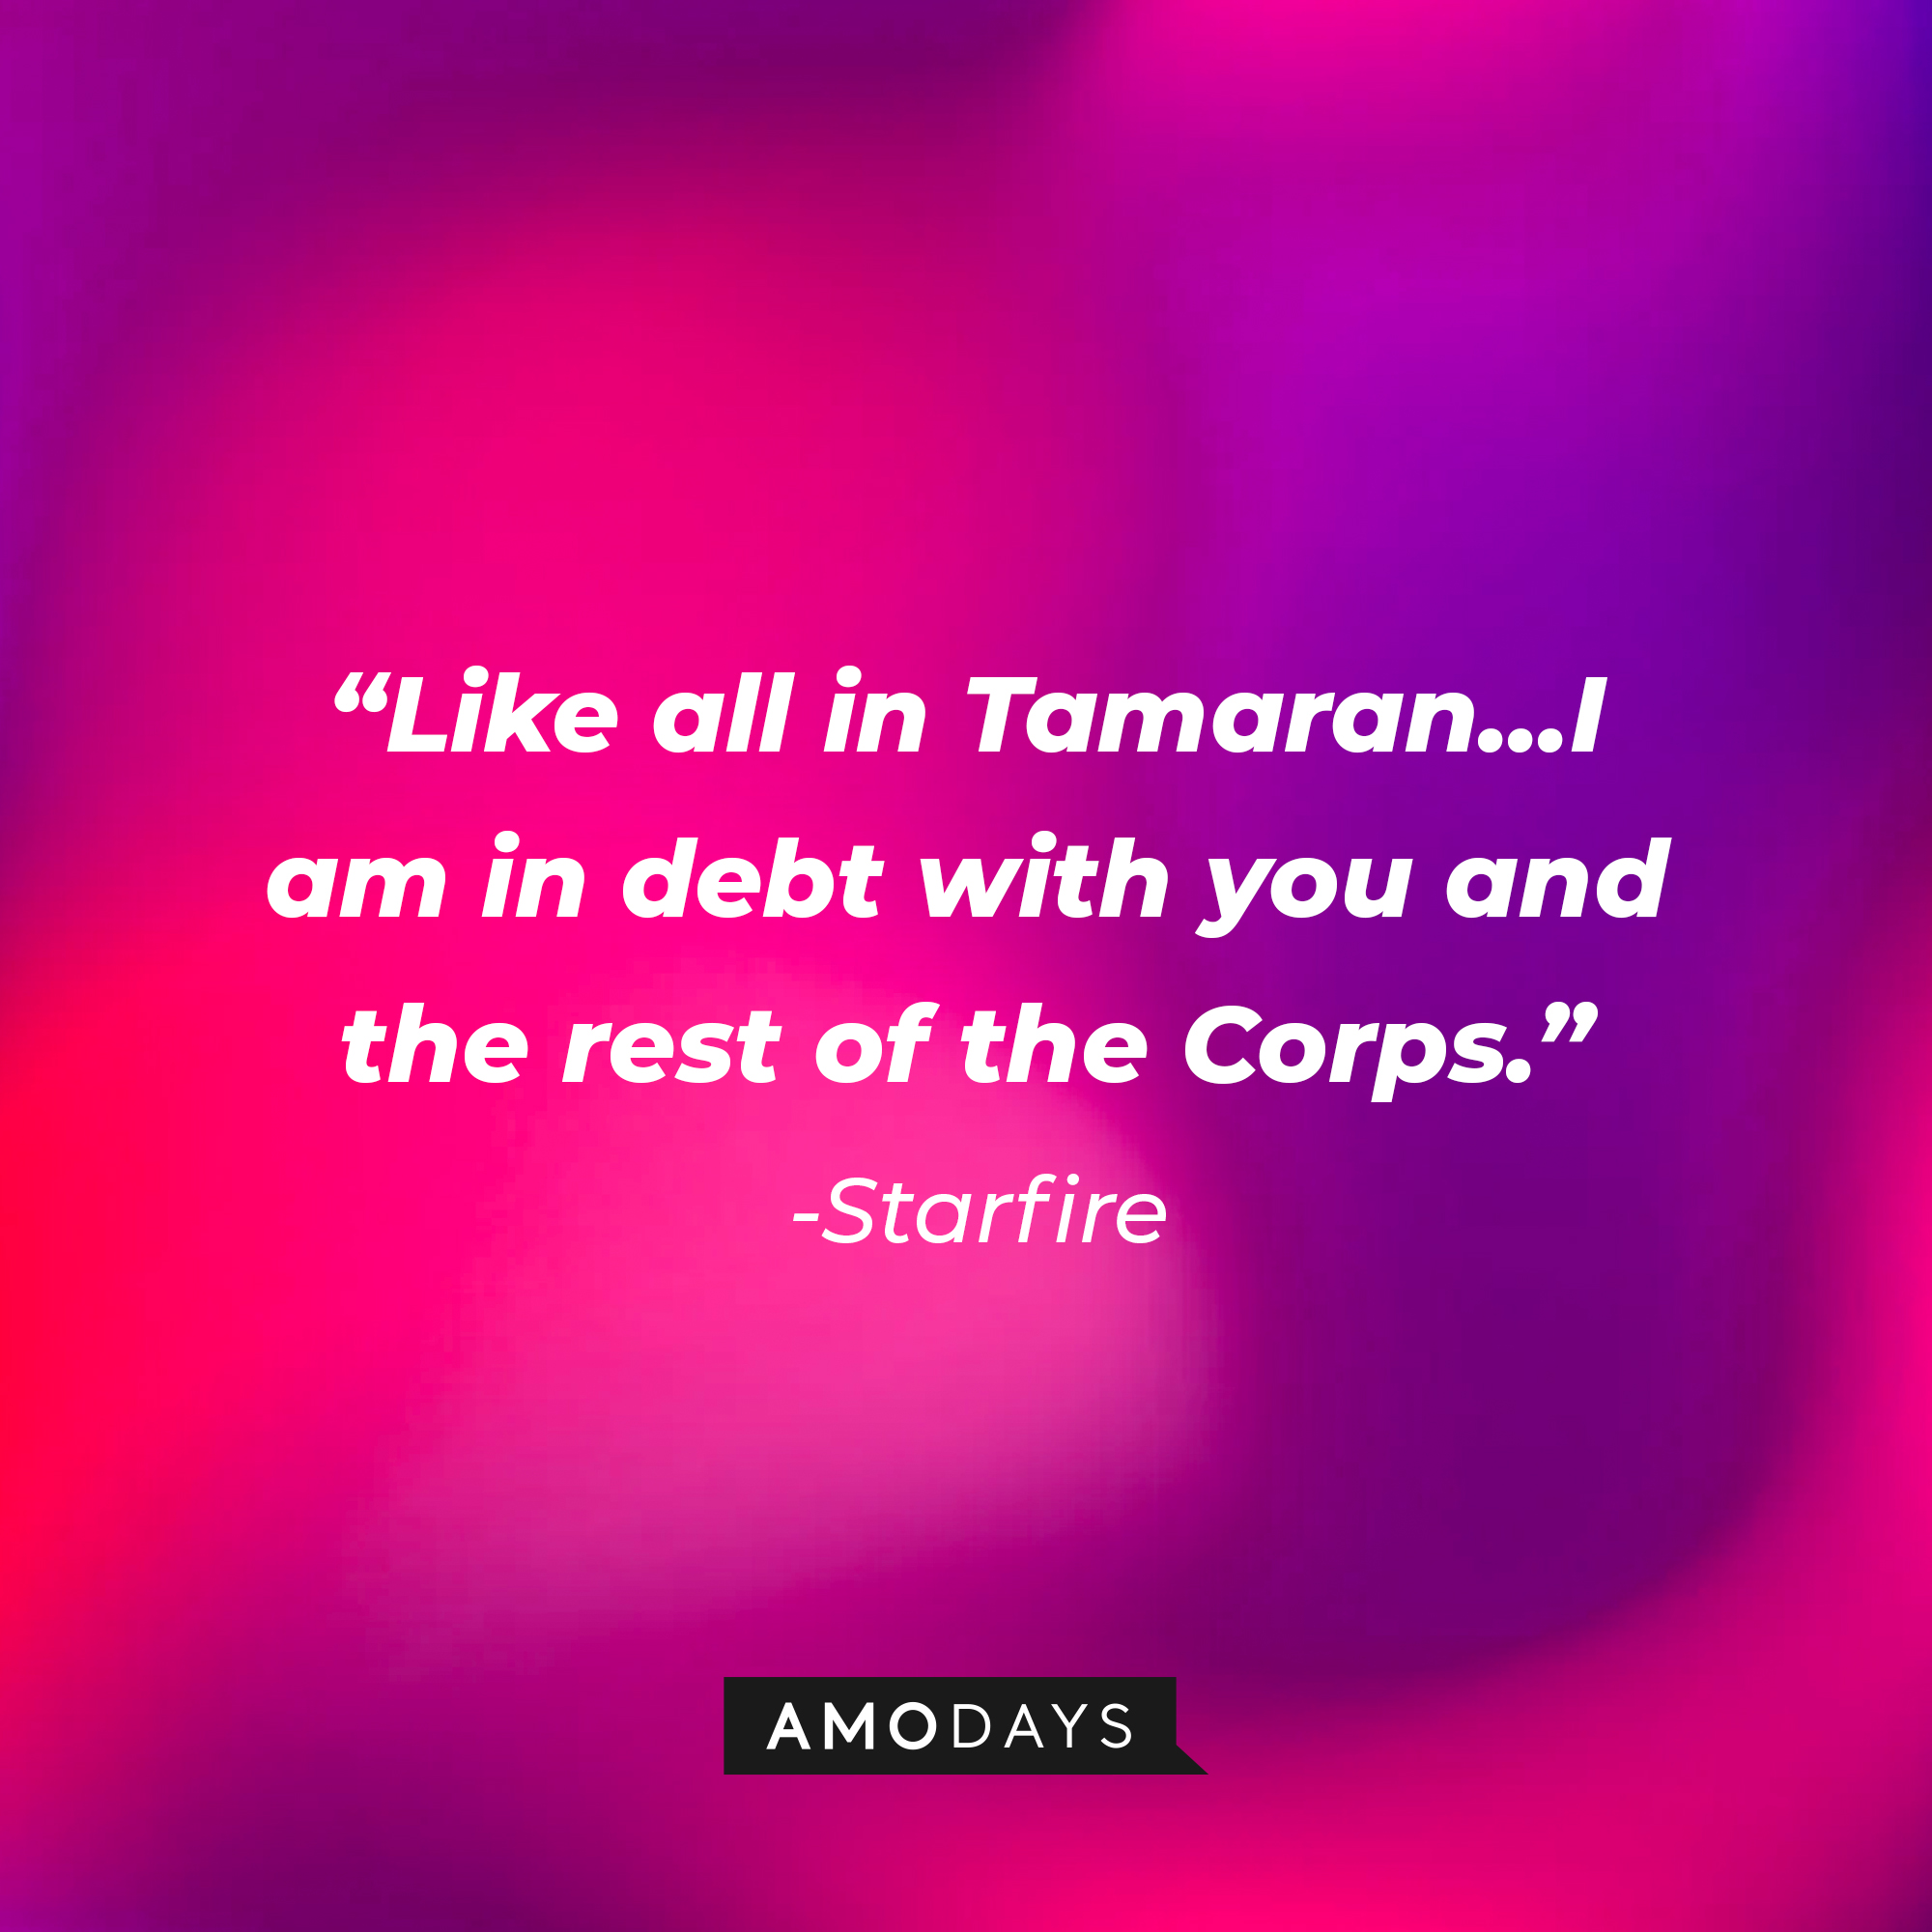 Starfire’s quote: "Like all in Tamaran...I am in debt with you and the rest of the Corps." | Source: AmoDays